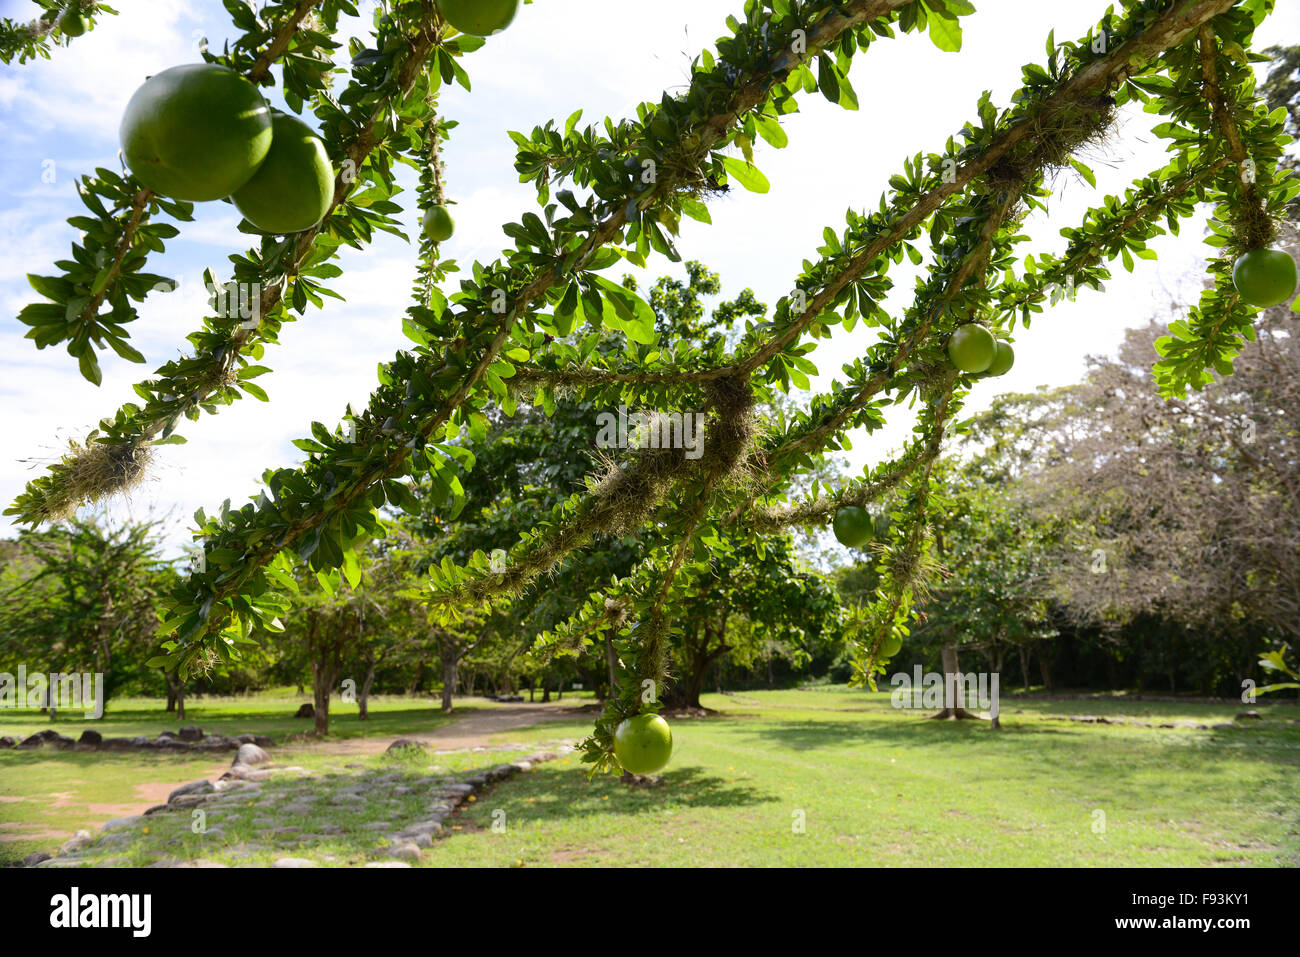 Branches of a calabash tree with some fruit hanging from it at the Tibes Indigenous Ceremonial Center. Ponce, Puerto Rico. Stock Photo